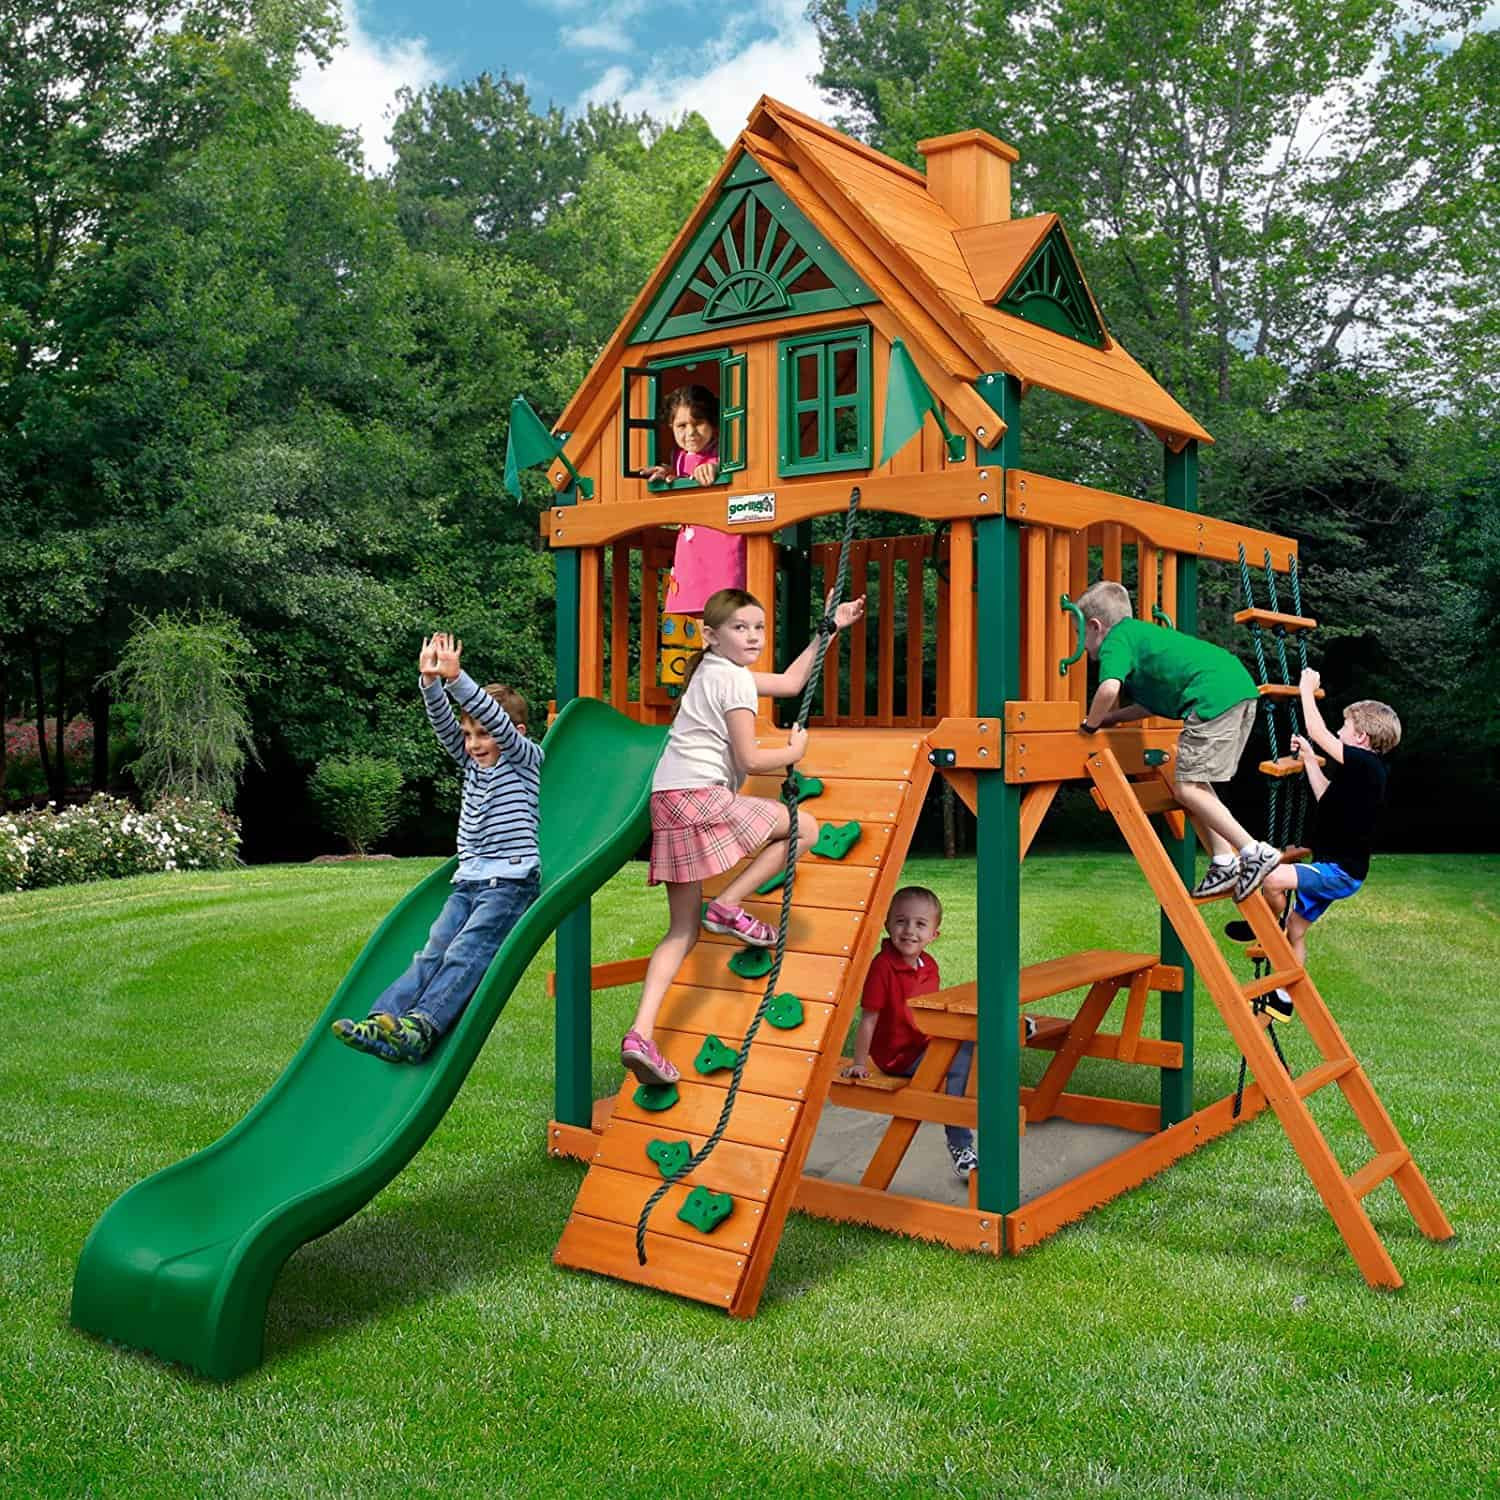 Kids Play House Swing Set
 Swing Sets for Small Yards The Backyard Site